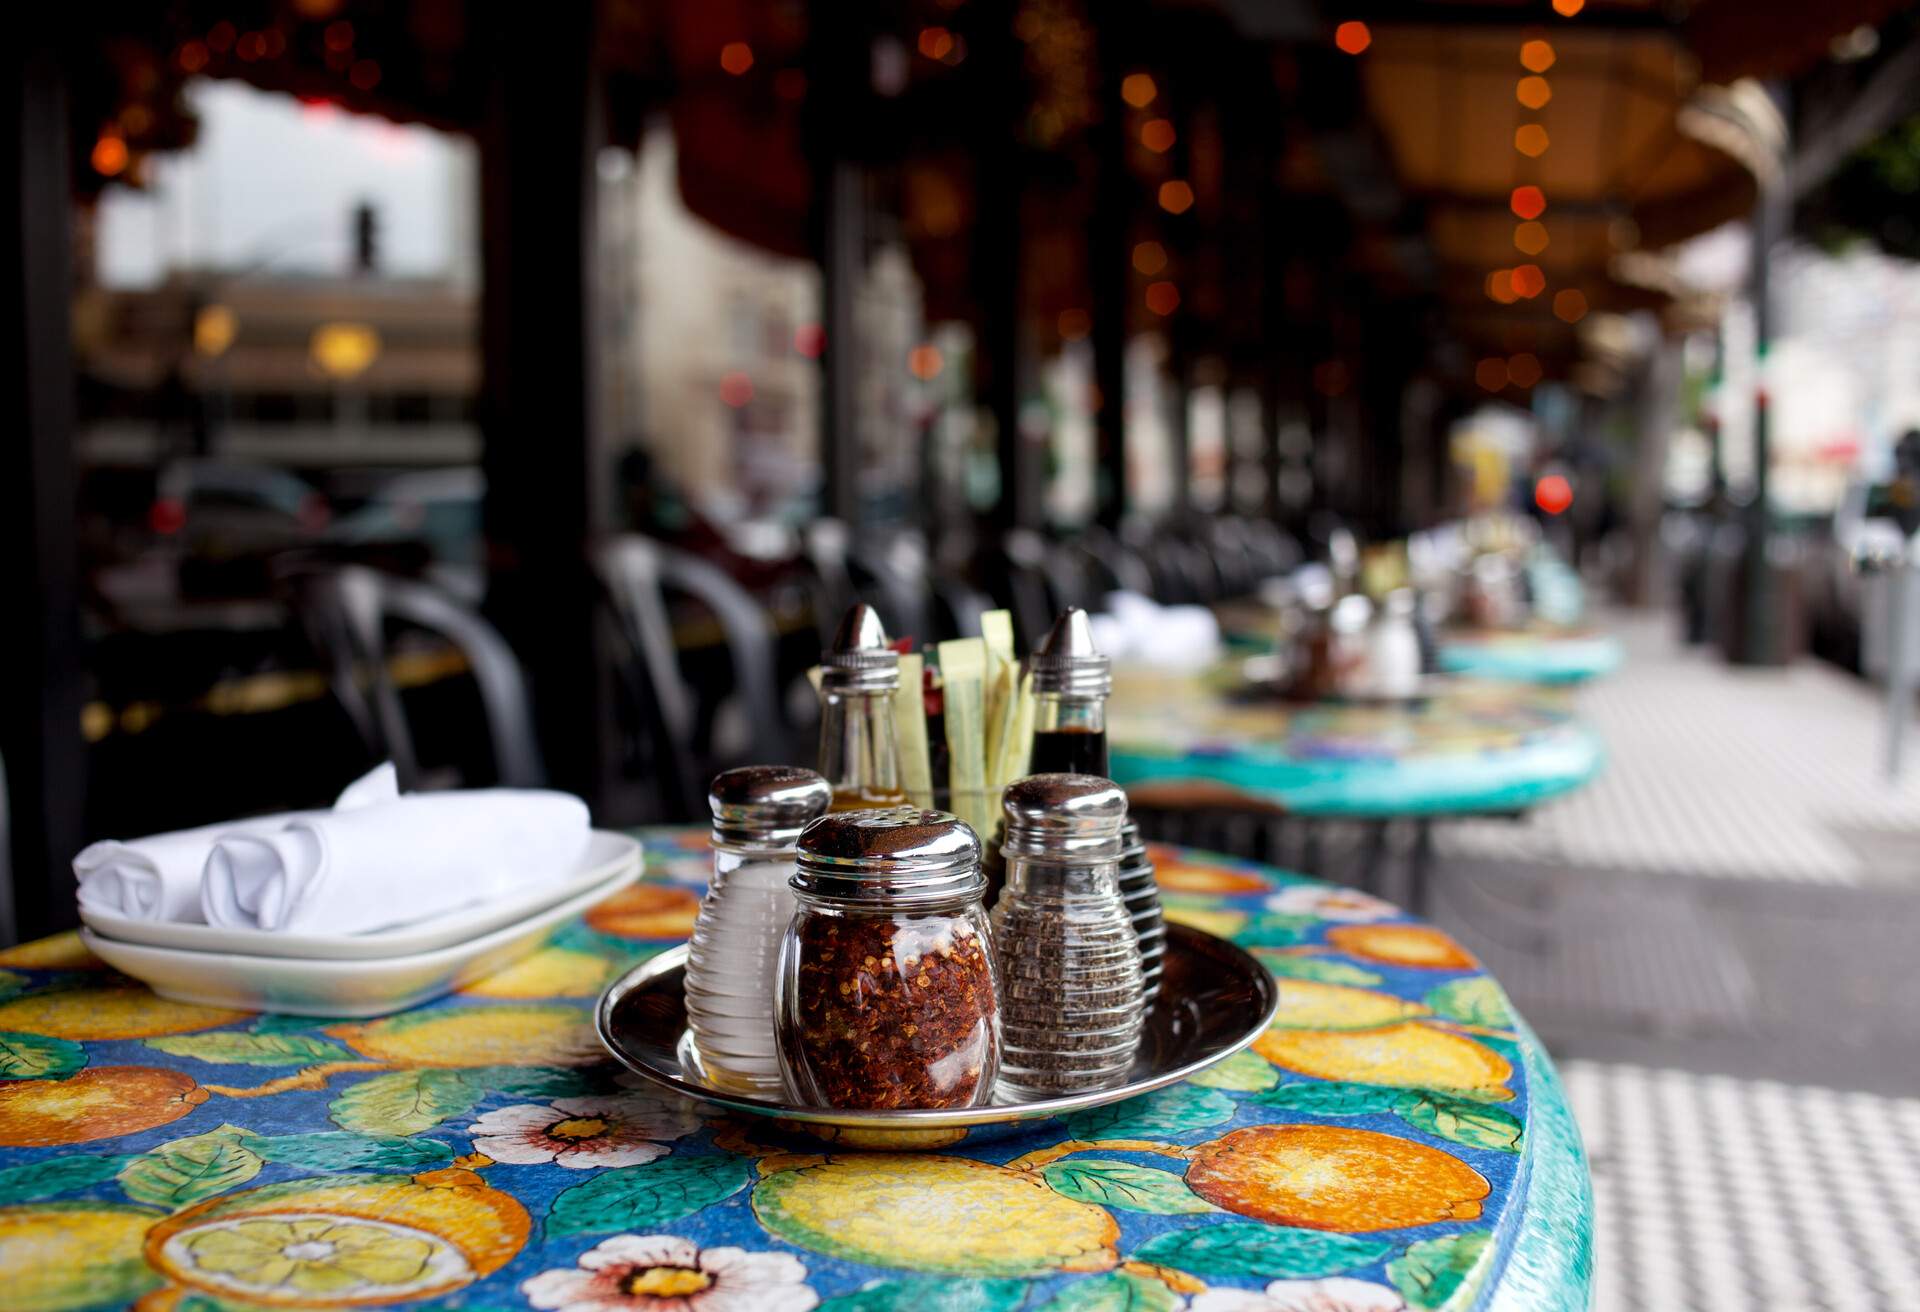 DEST_USA_CA_SAN_FRANCISCO_LITTLE_ITALY__GettyImages-154946540